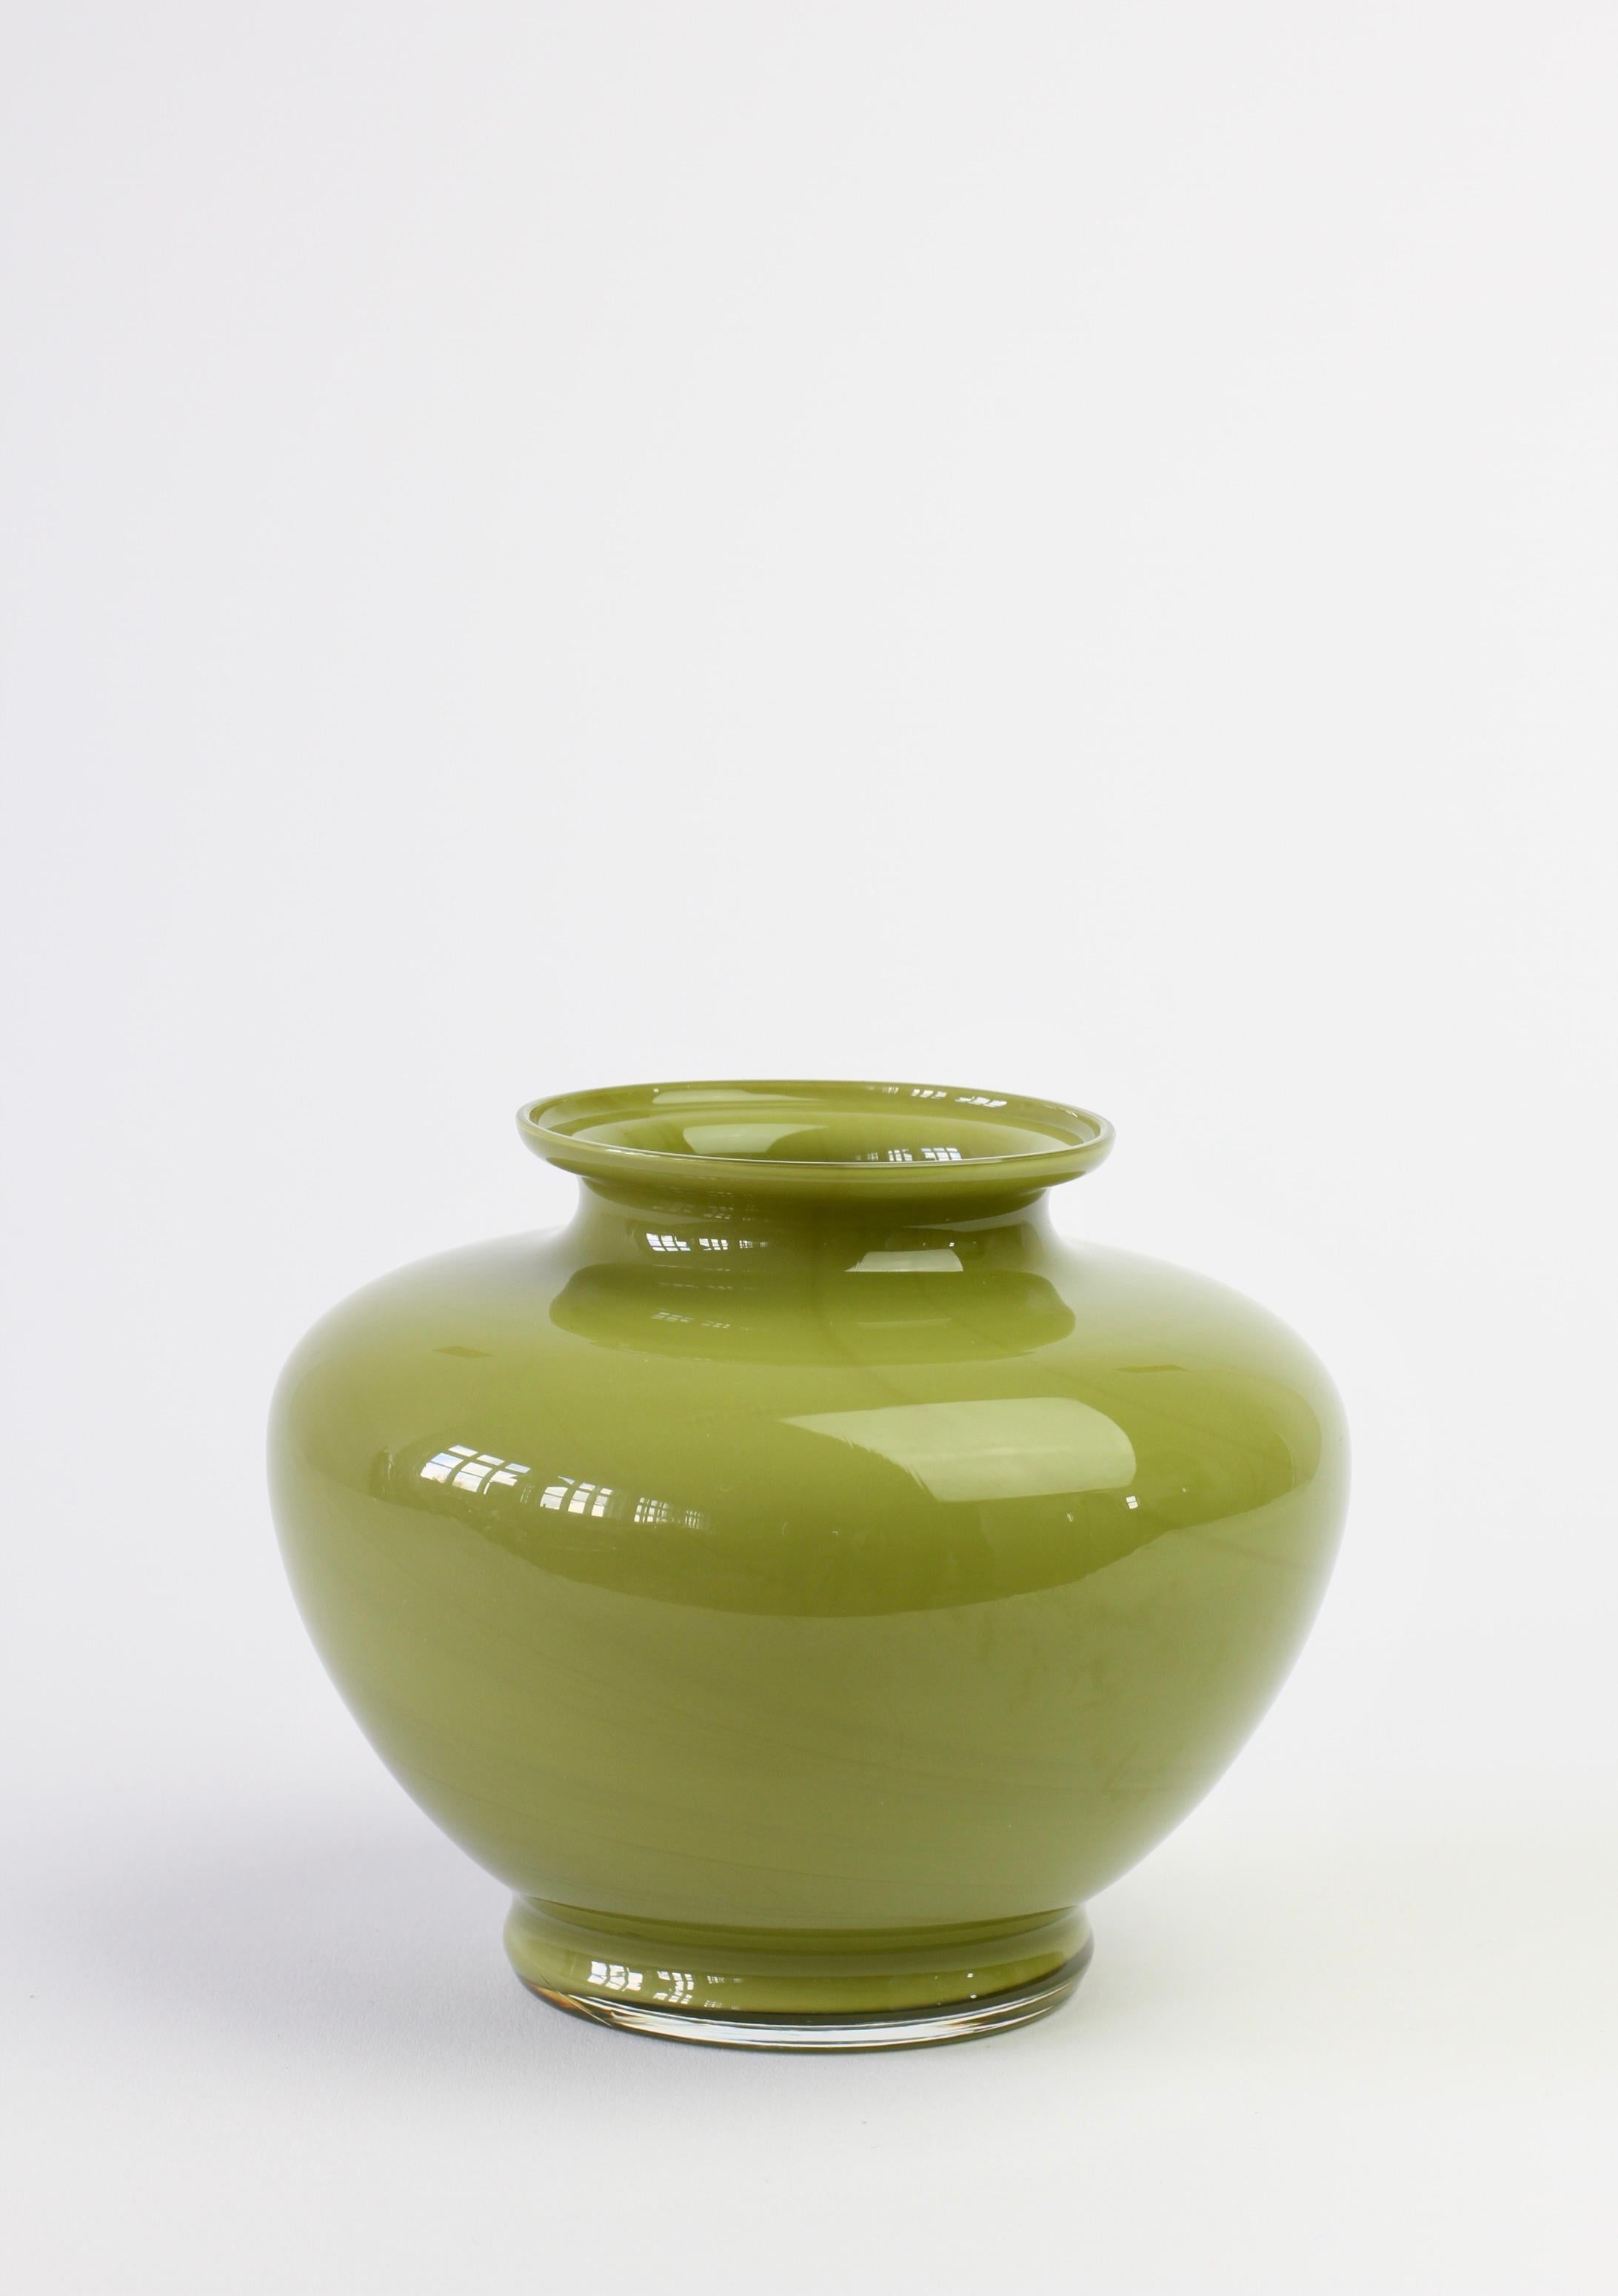 Apple or moss green Cenedese vintage Italian midcentury Murano glass vase or vessel, made in Italy, circa 1970-1990. Particularly striking is the elegant form. The piece has the characteristics of hand thrown pottery with the unmistakable look and